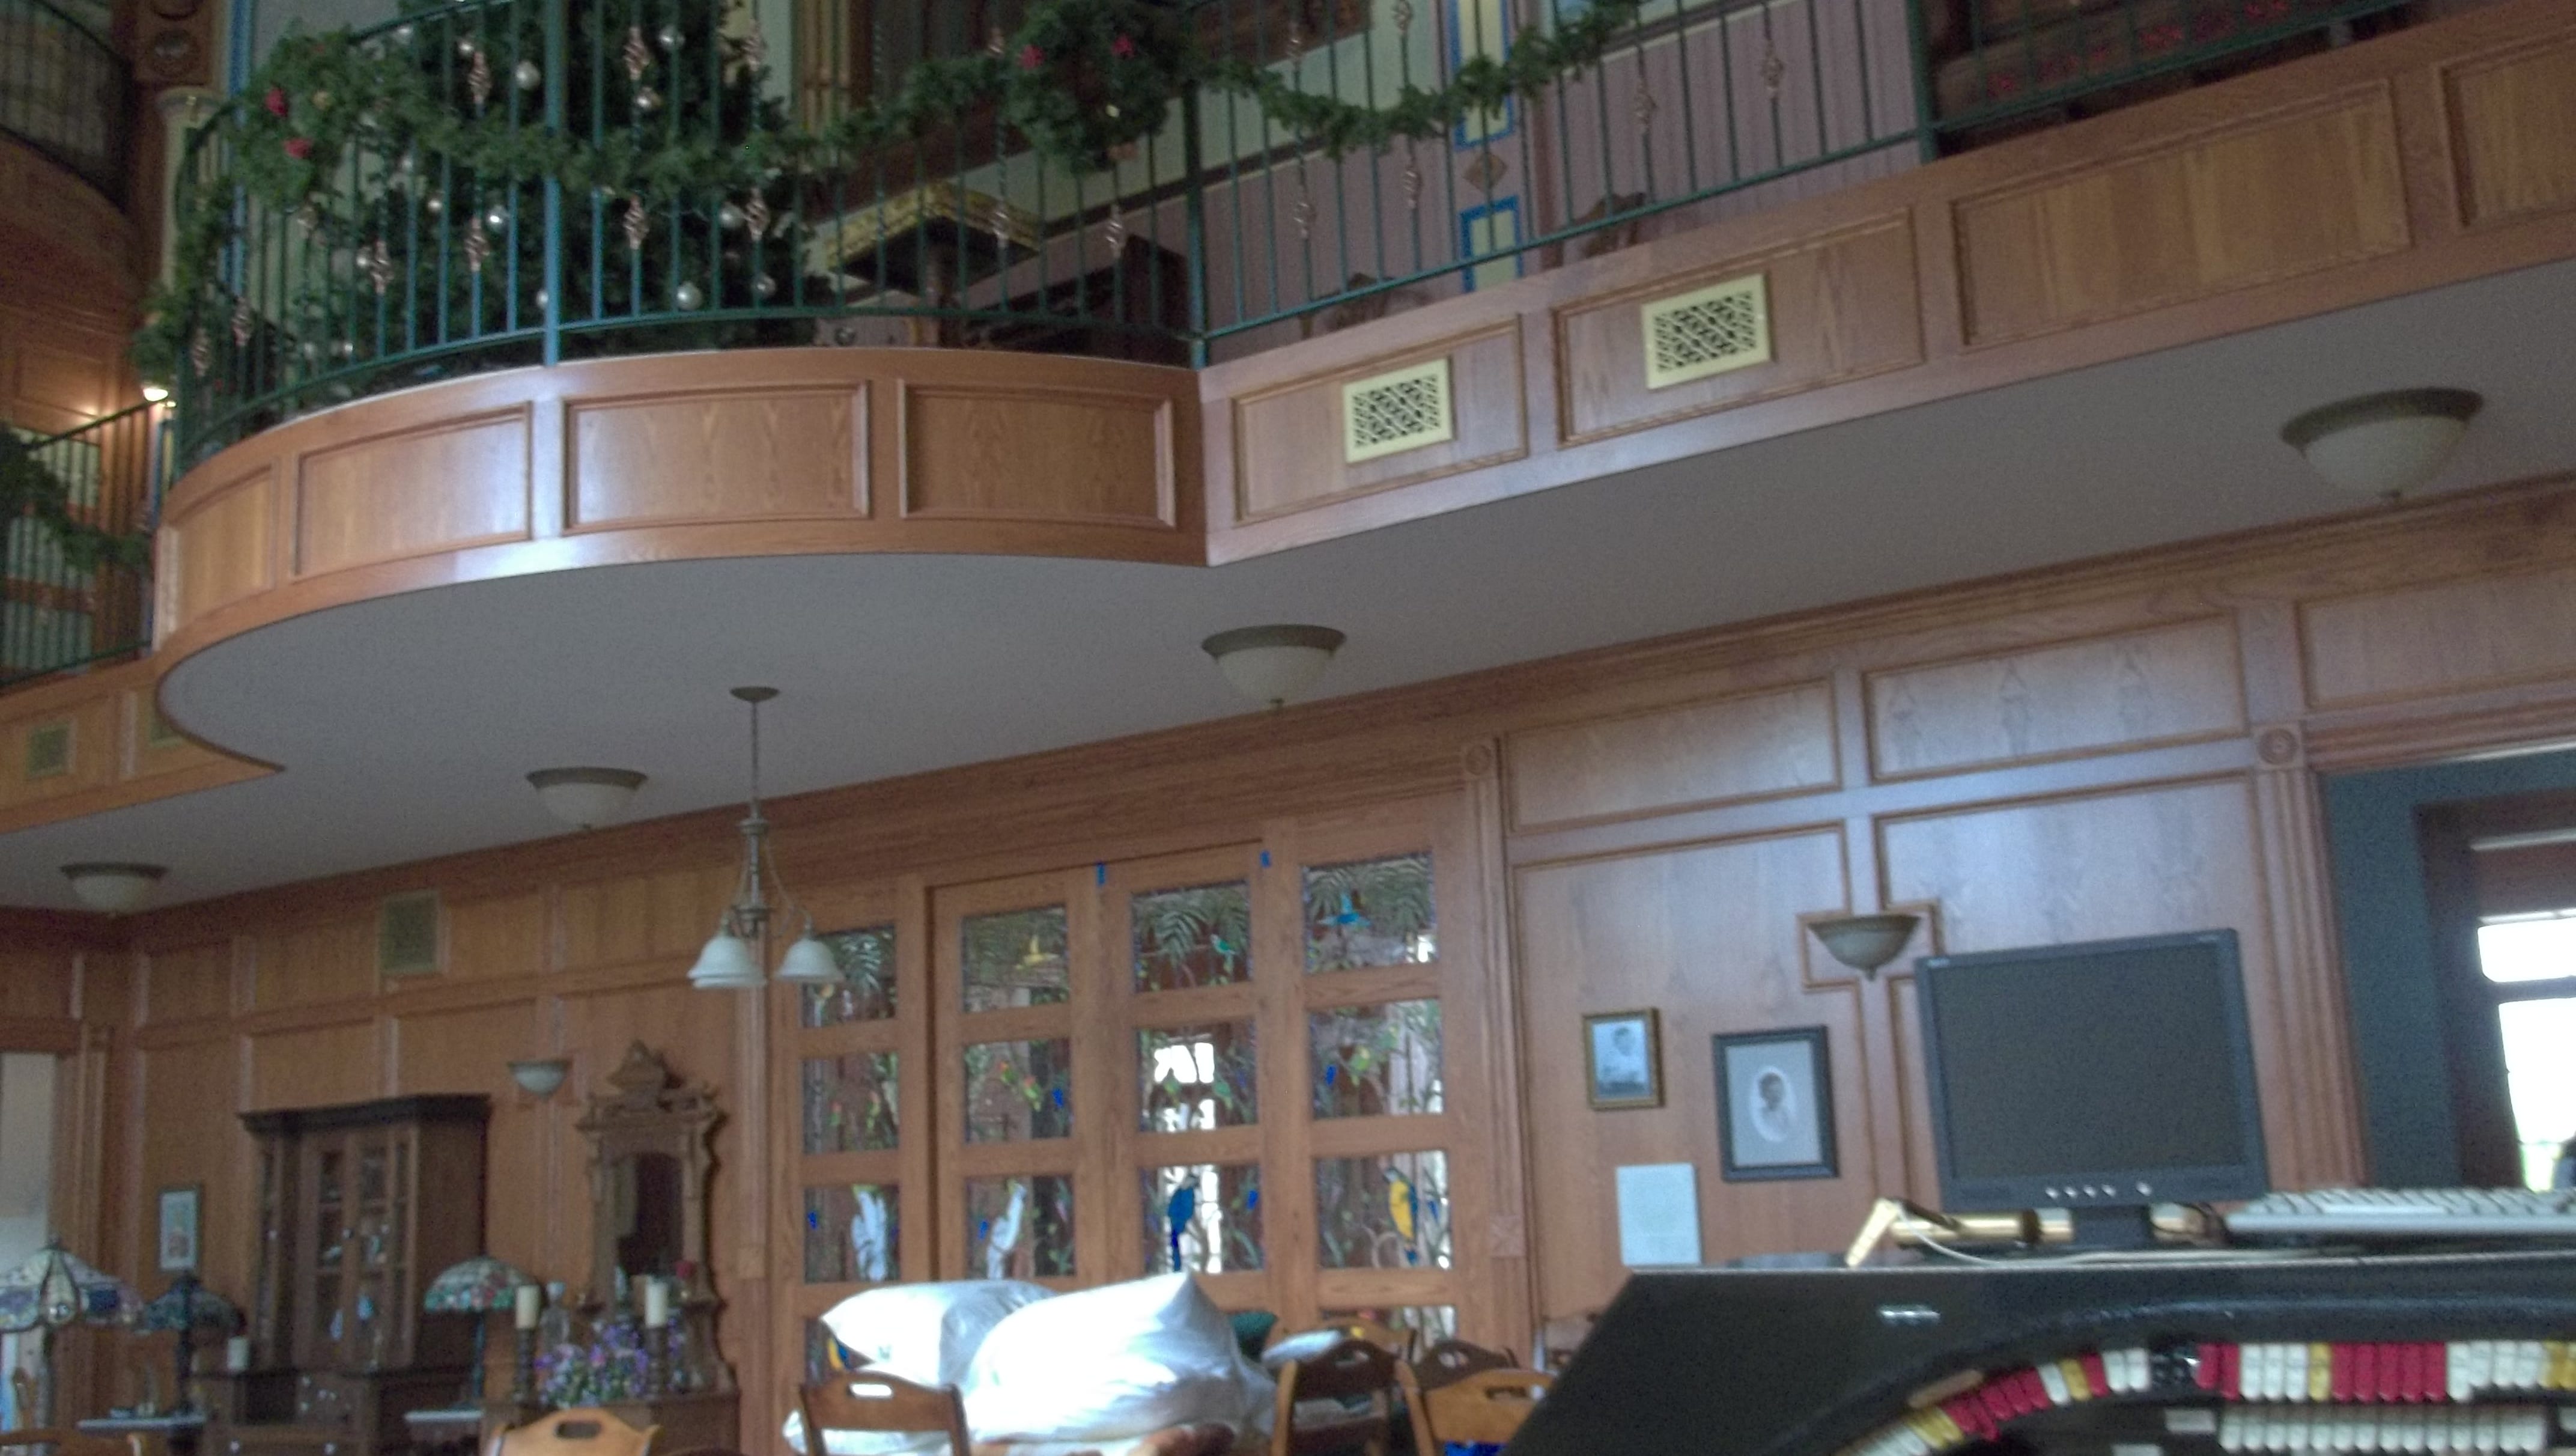 A great room includes wood paneling, a pipe organ and a mezzanine.